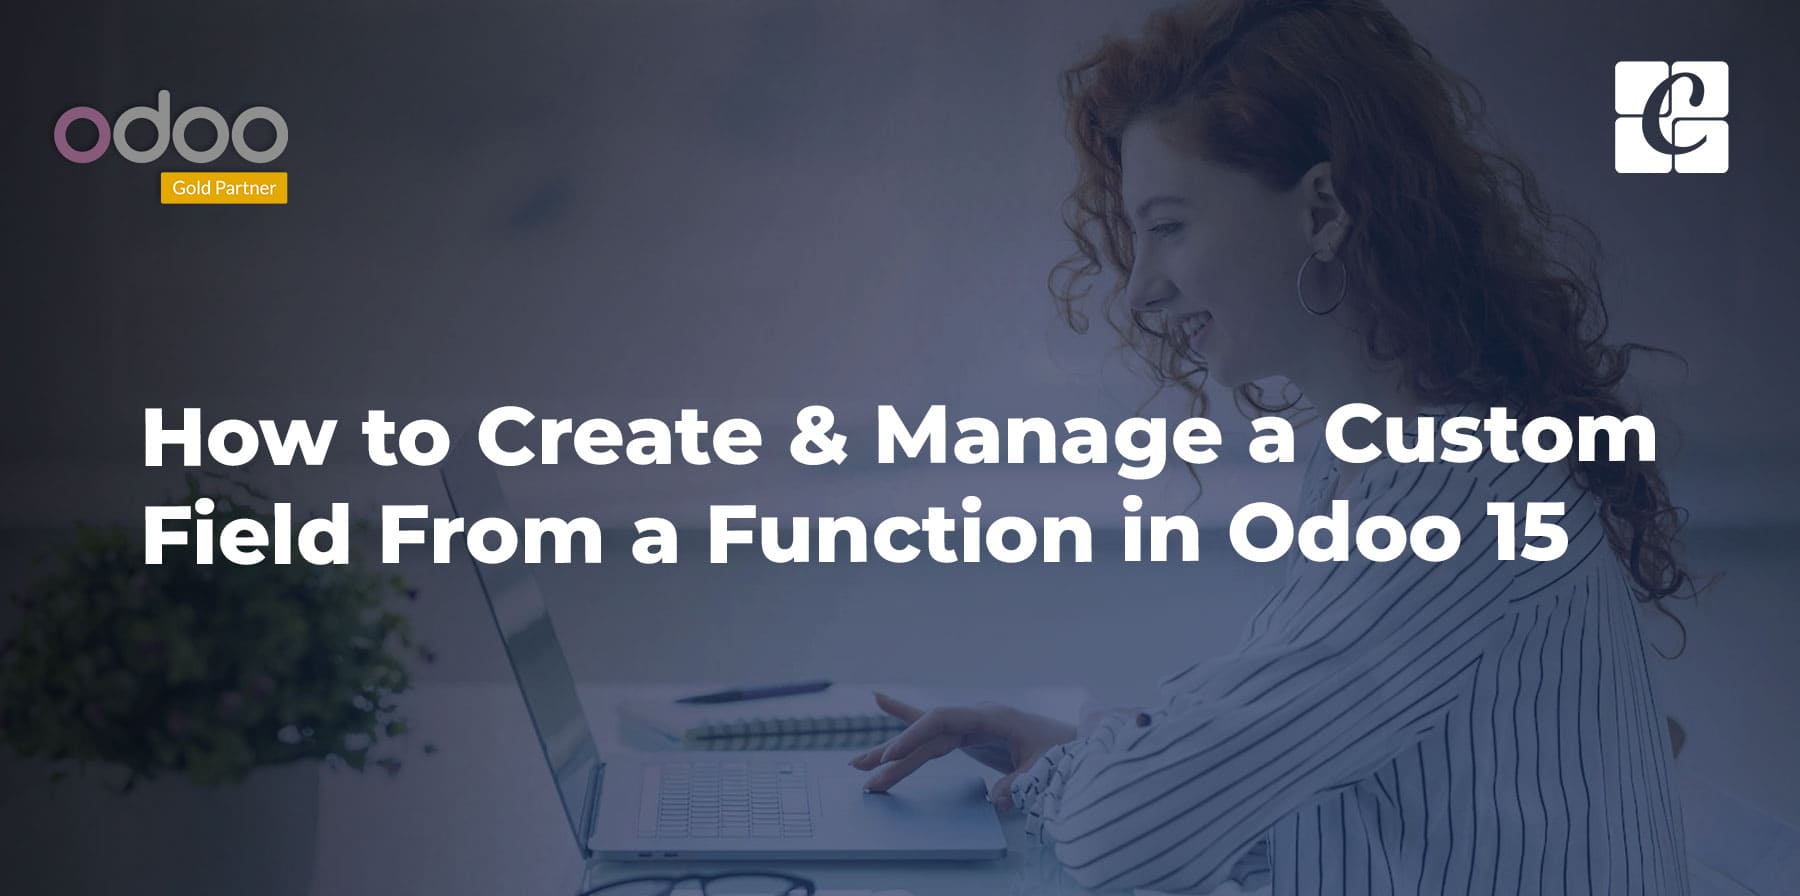 how-to-create-manage-a-custom-field-from-a-function-odoo-15.jpg